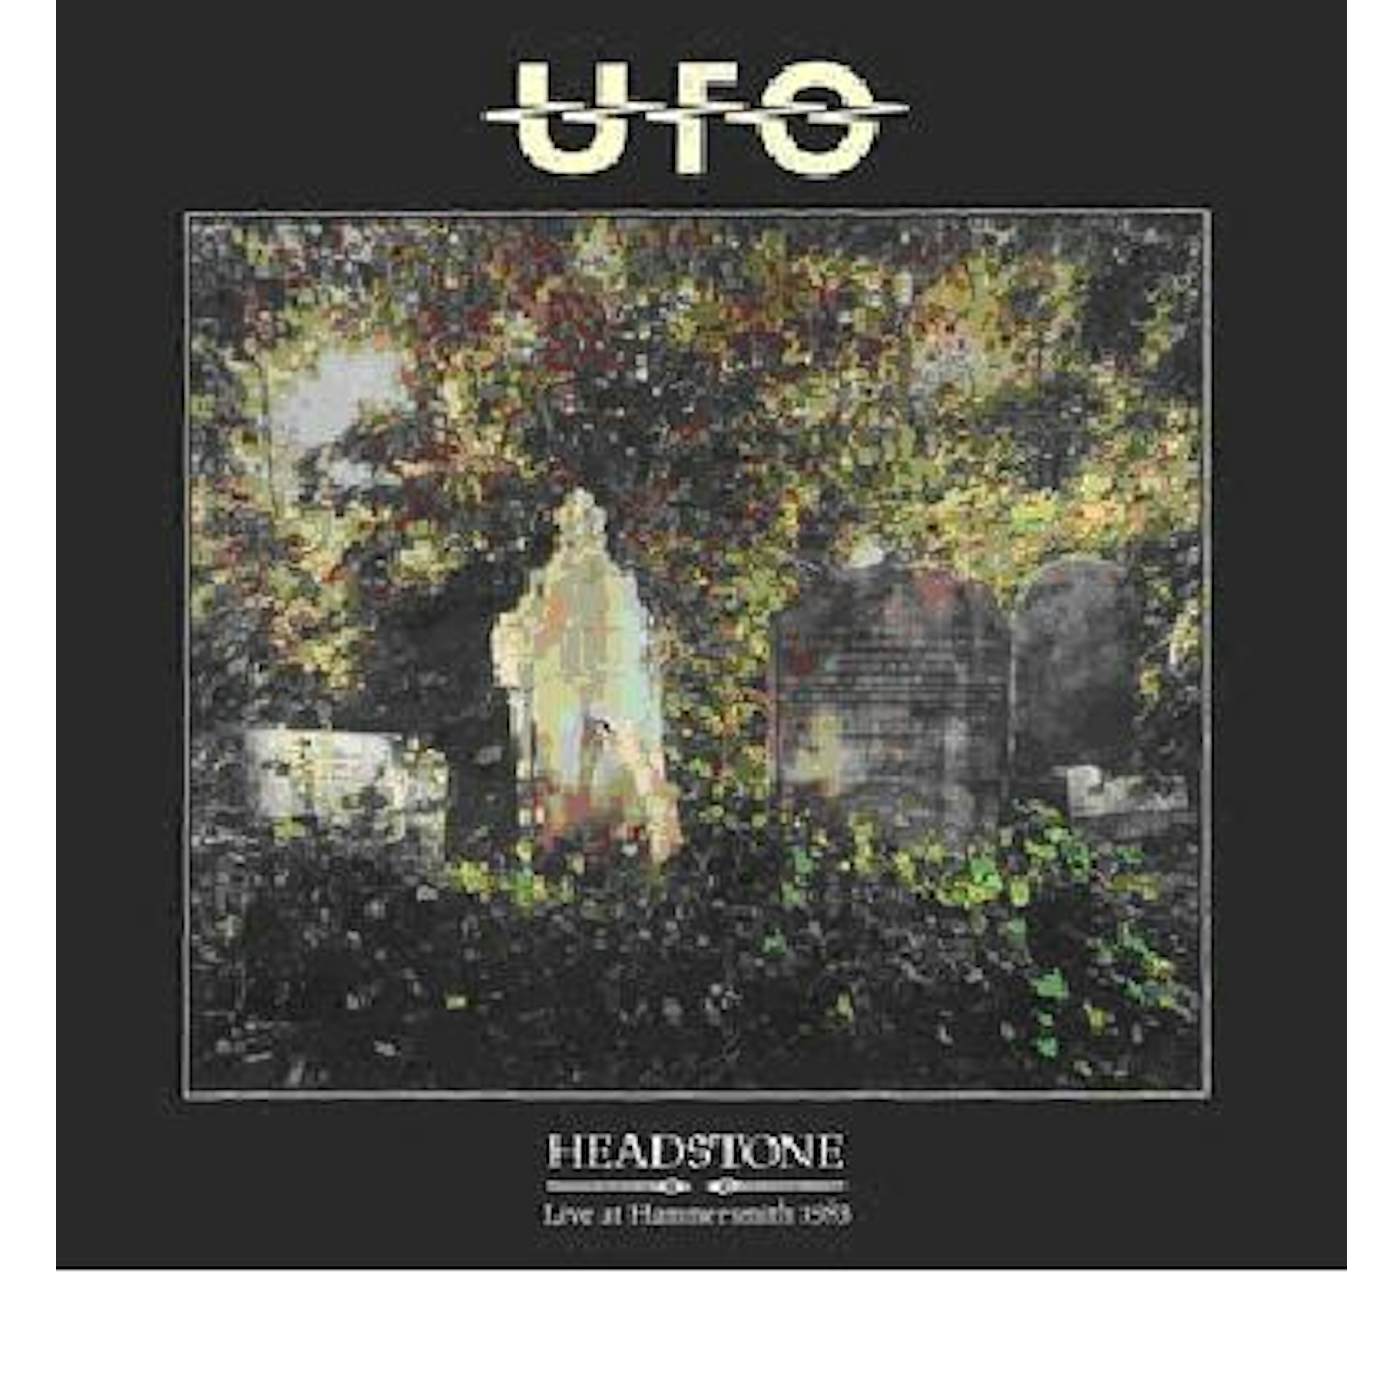 UFO HEADSTONE (LIVE AT HAMMERSMITH ODEON 1983) CD